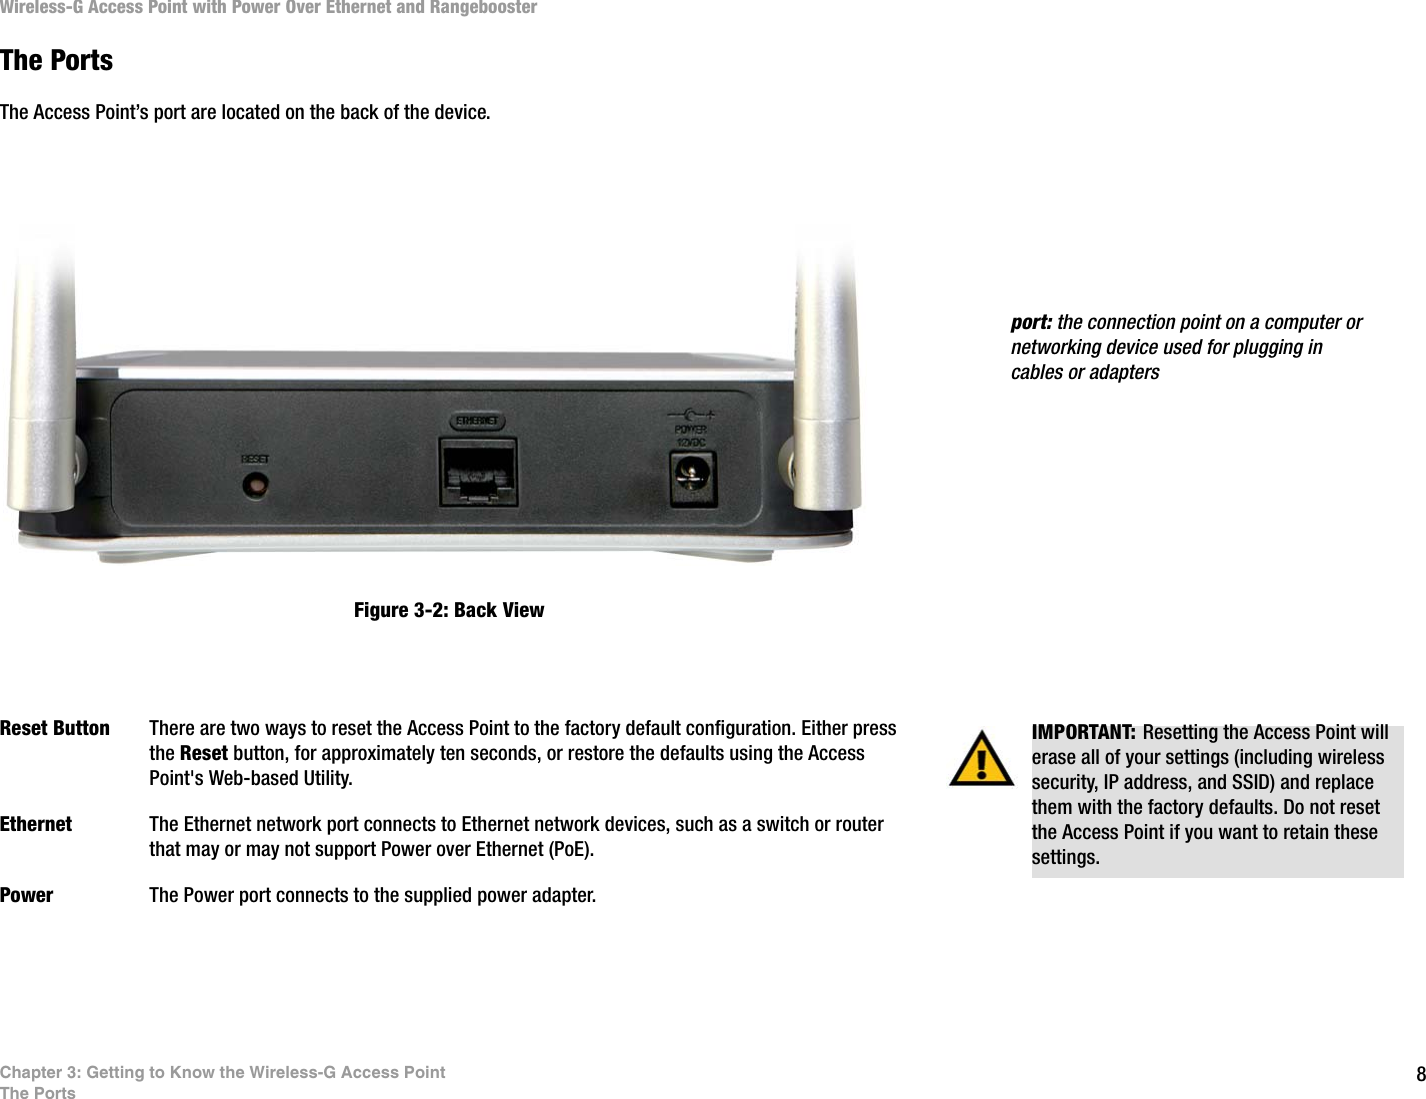 8Chapter 3: Getting to Know the Wireless-G Access PointThe PortsWireless-G Access Point with Power Over Ethernet and RangeboosterThe PortsThe Access Point’s port are located on the back of the device. Reset Button There are two ways to reset the Access Point to the factory default configuration. Either press the Reset button, for approximately ten seconds, or restore the defaults using the Access Point&apos;s Web-based Utility.Ethernet The Ethernet network port connects to Ethernet network devices, such as a switch or router that may or may not support Power over Ethernet (PoE). Power The Power port connects to the supplied power adapter.port: the connection point on a computer or networking device used for plugging in cables or adaptersFigure 3-2: Back ViewIMPORTANT: Resetting the Access Point will erase all of your settings (including wireless security, IP address, and SSID) and replace them with the factory defaults. Do not reset the Access Point if you want to retain these settings.